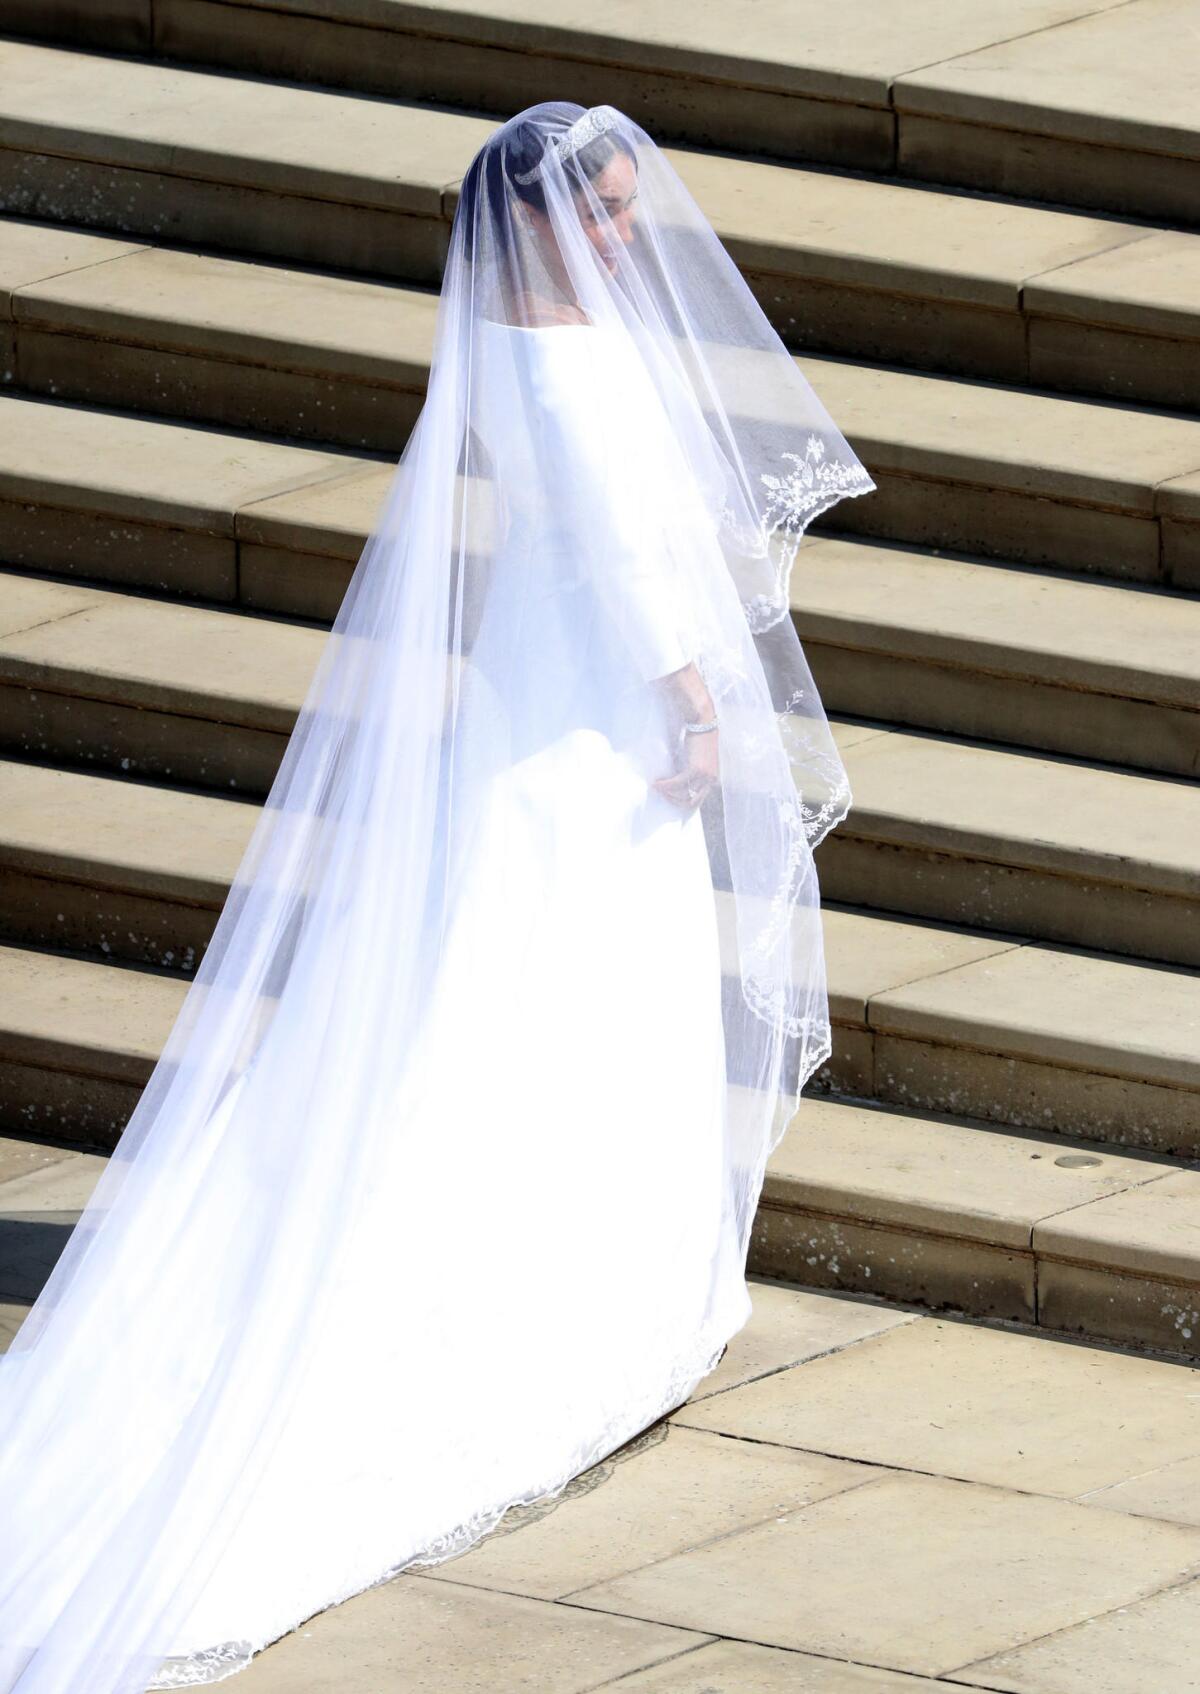 Meghan Markle chose a Givenchy haute couture gown created by British designer Clare Waight Keller.